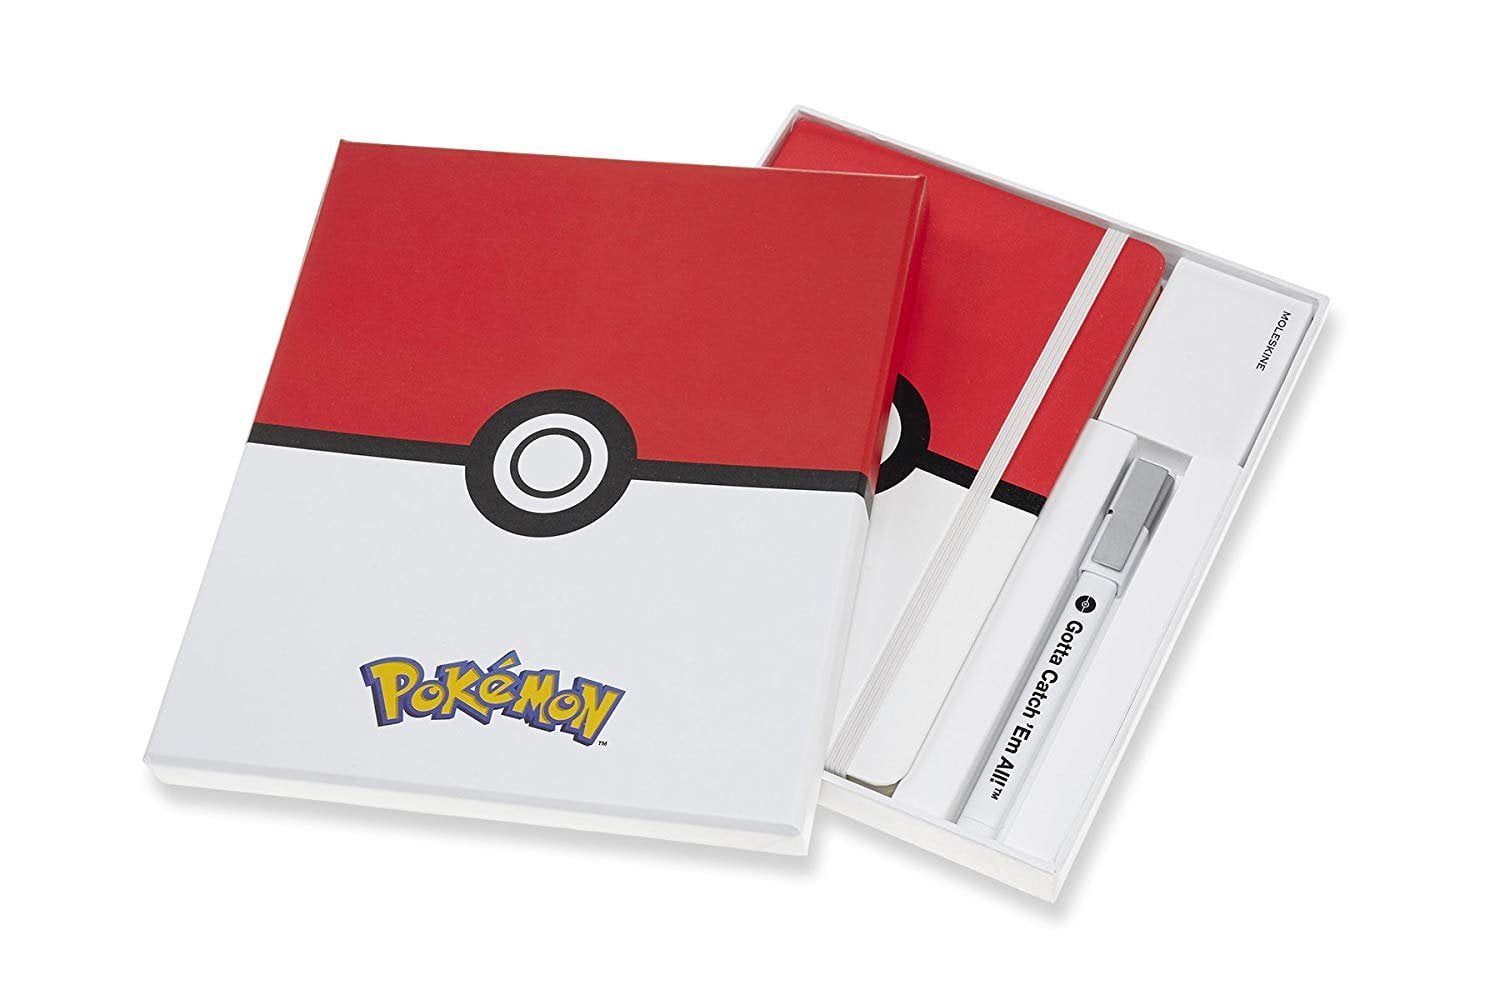 Moleskine Limited Edition Notebook Pokemon Jigglypuff, Pocket, Ruled, Pink,  Hard Cover (3.5 x 5.5) (Diary)